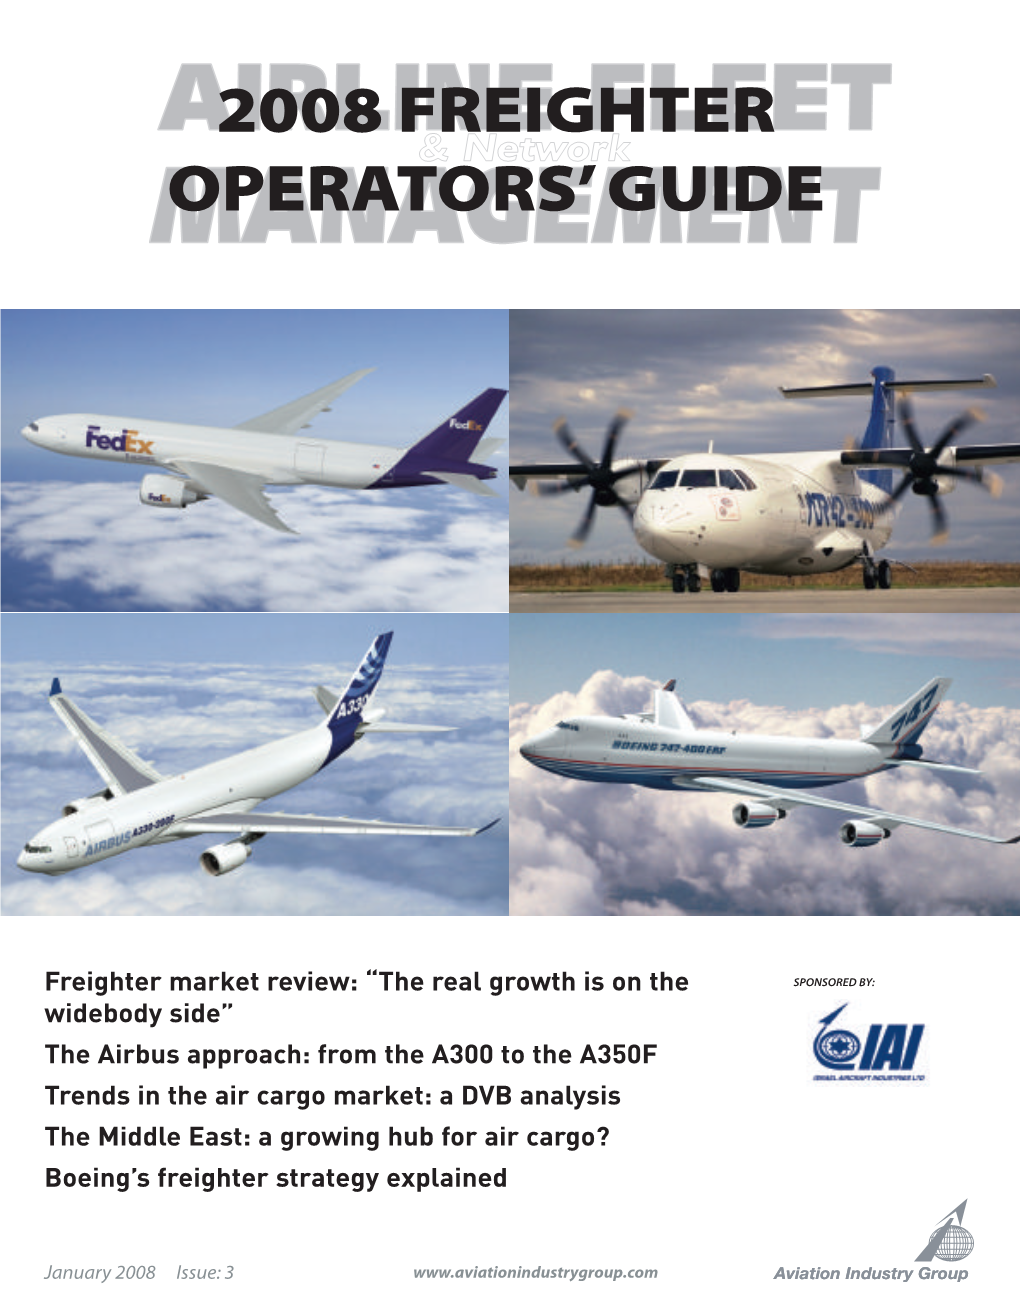 2008 Freighter Operators' Guide